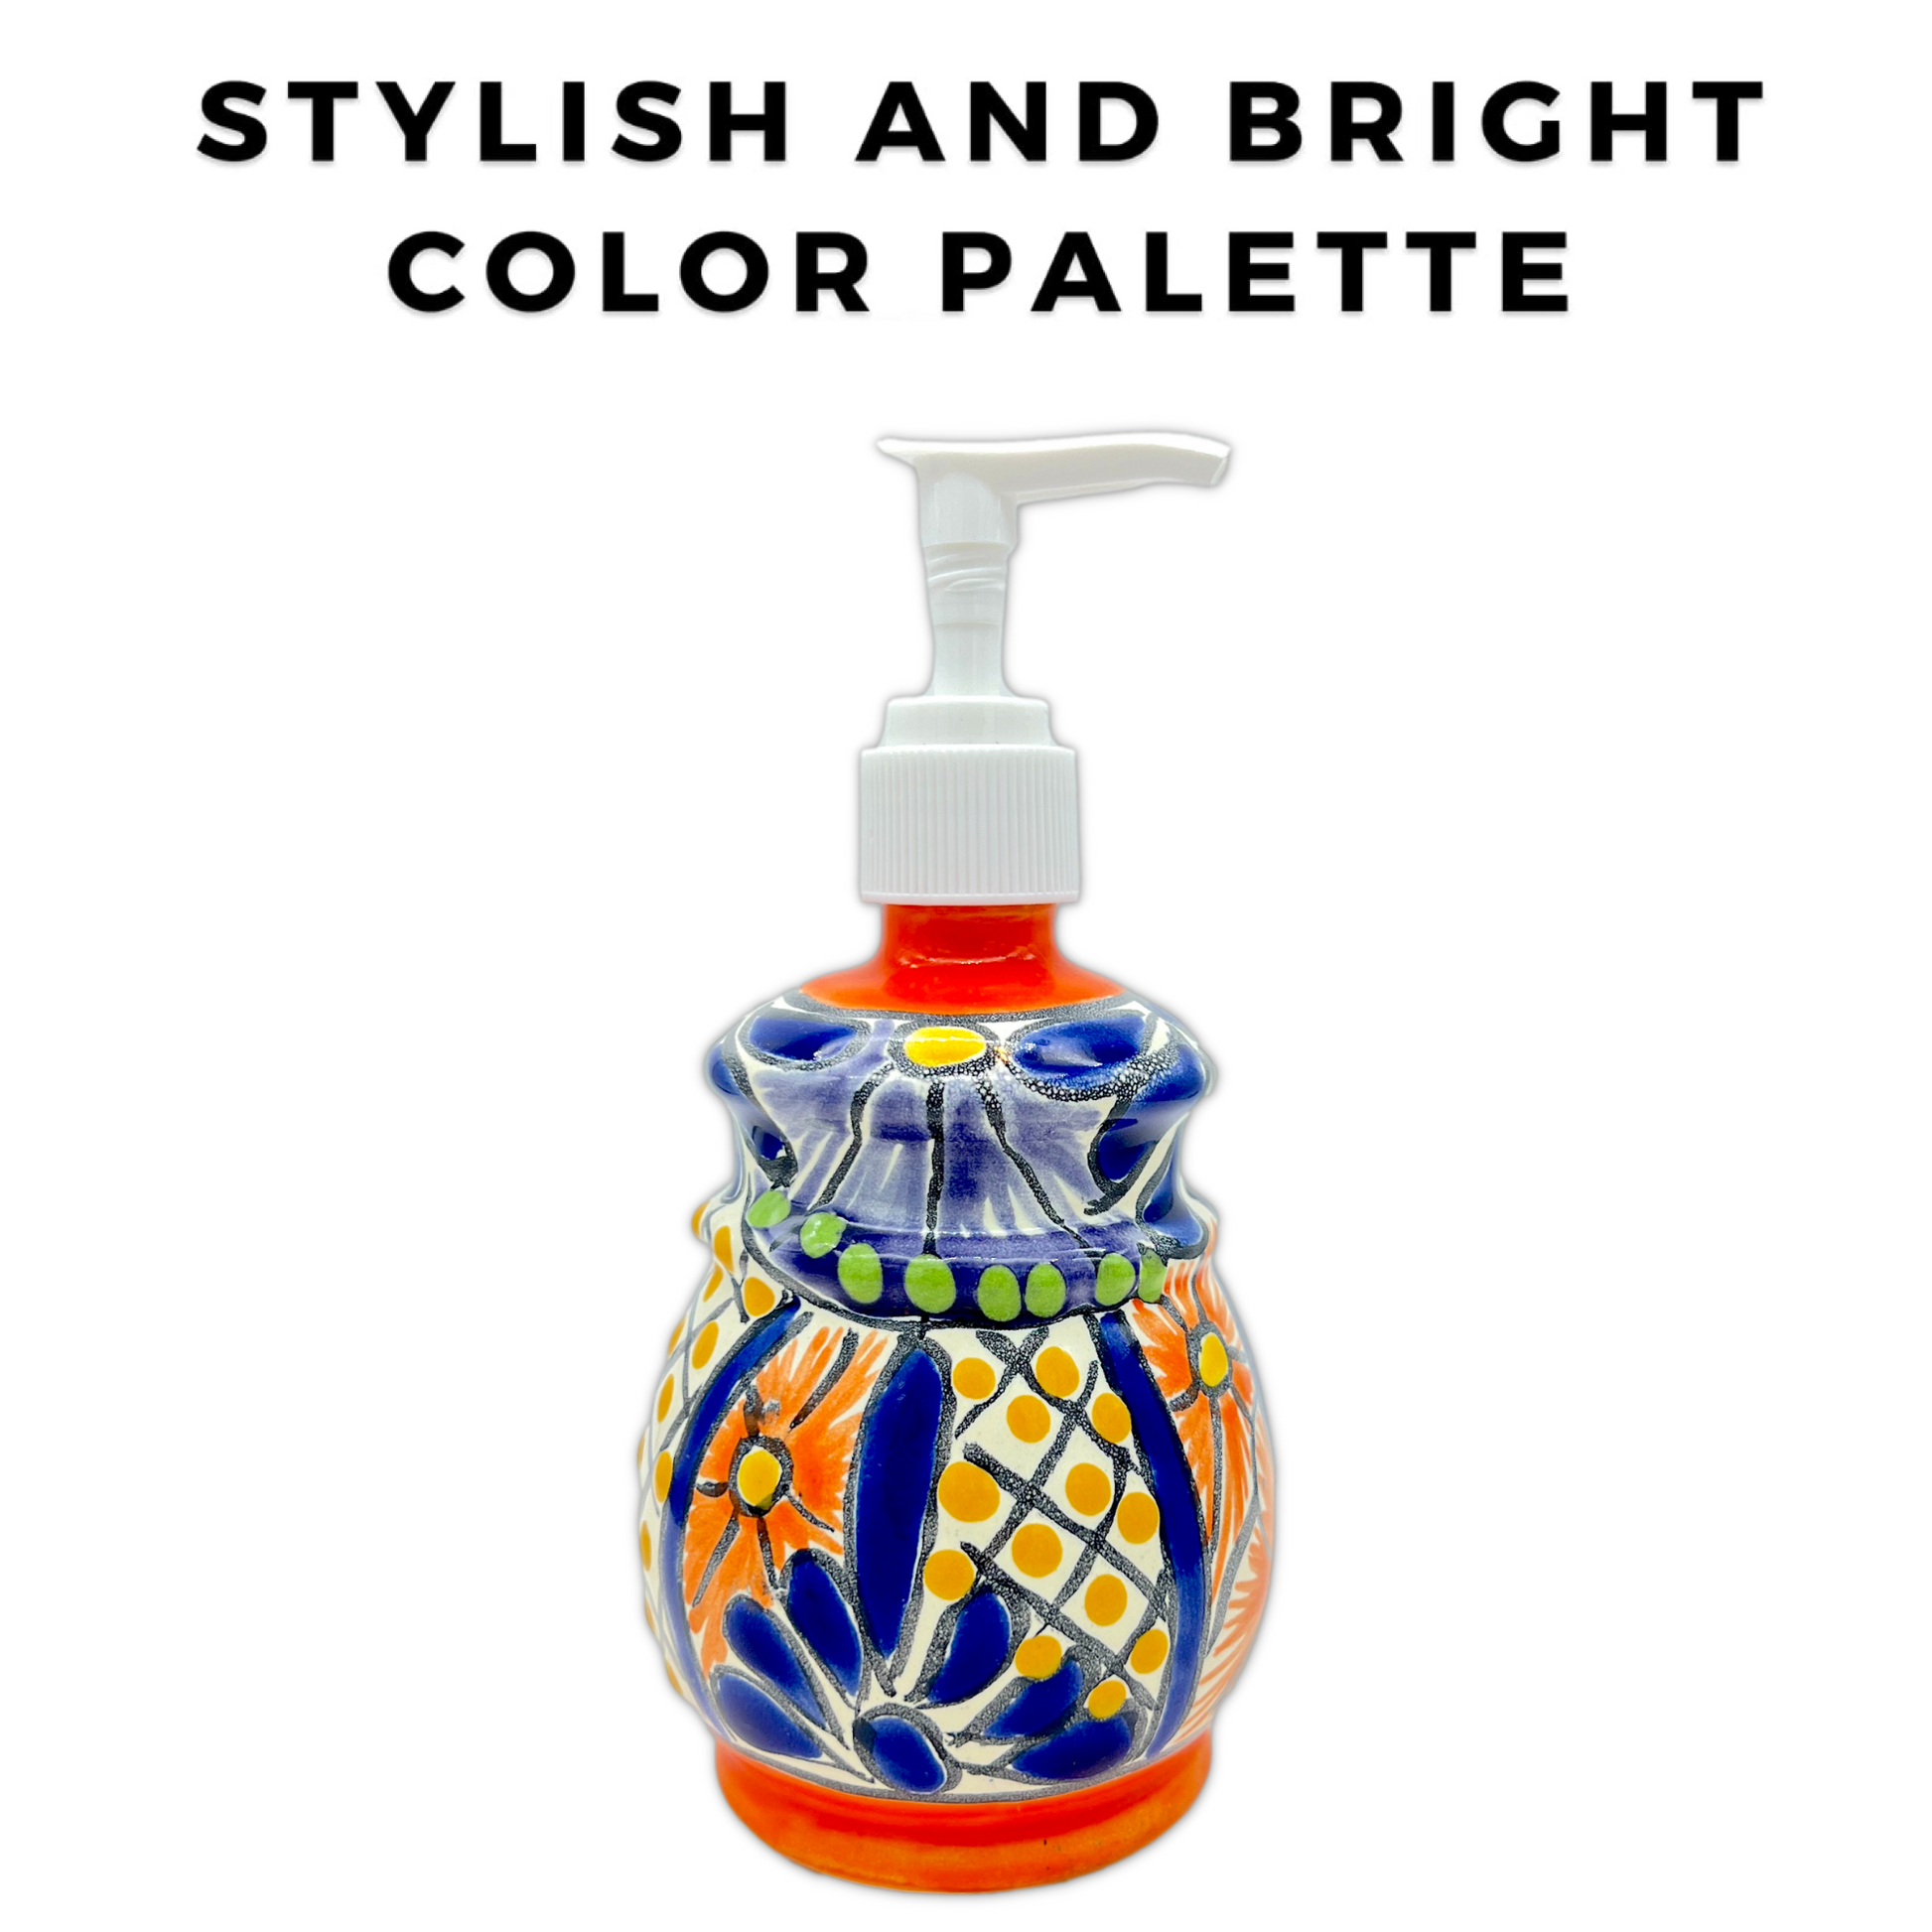 stylish color palette A multicolored, bell design, hand-painted Talavera ceramic soap dispenser sourced from skilled Mexican artisans.